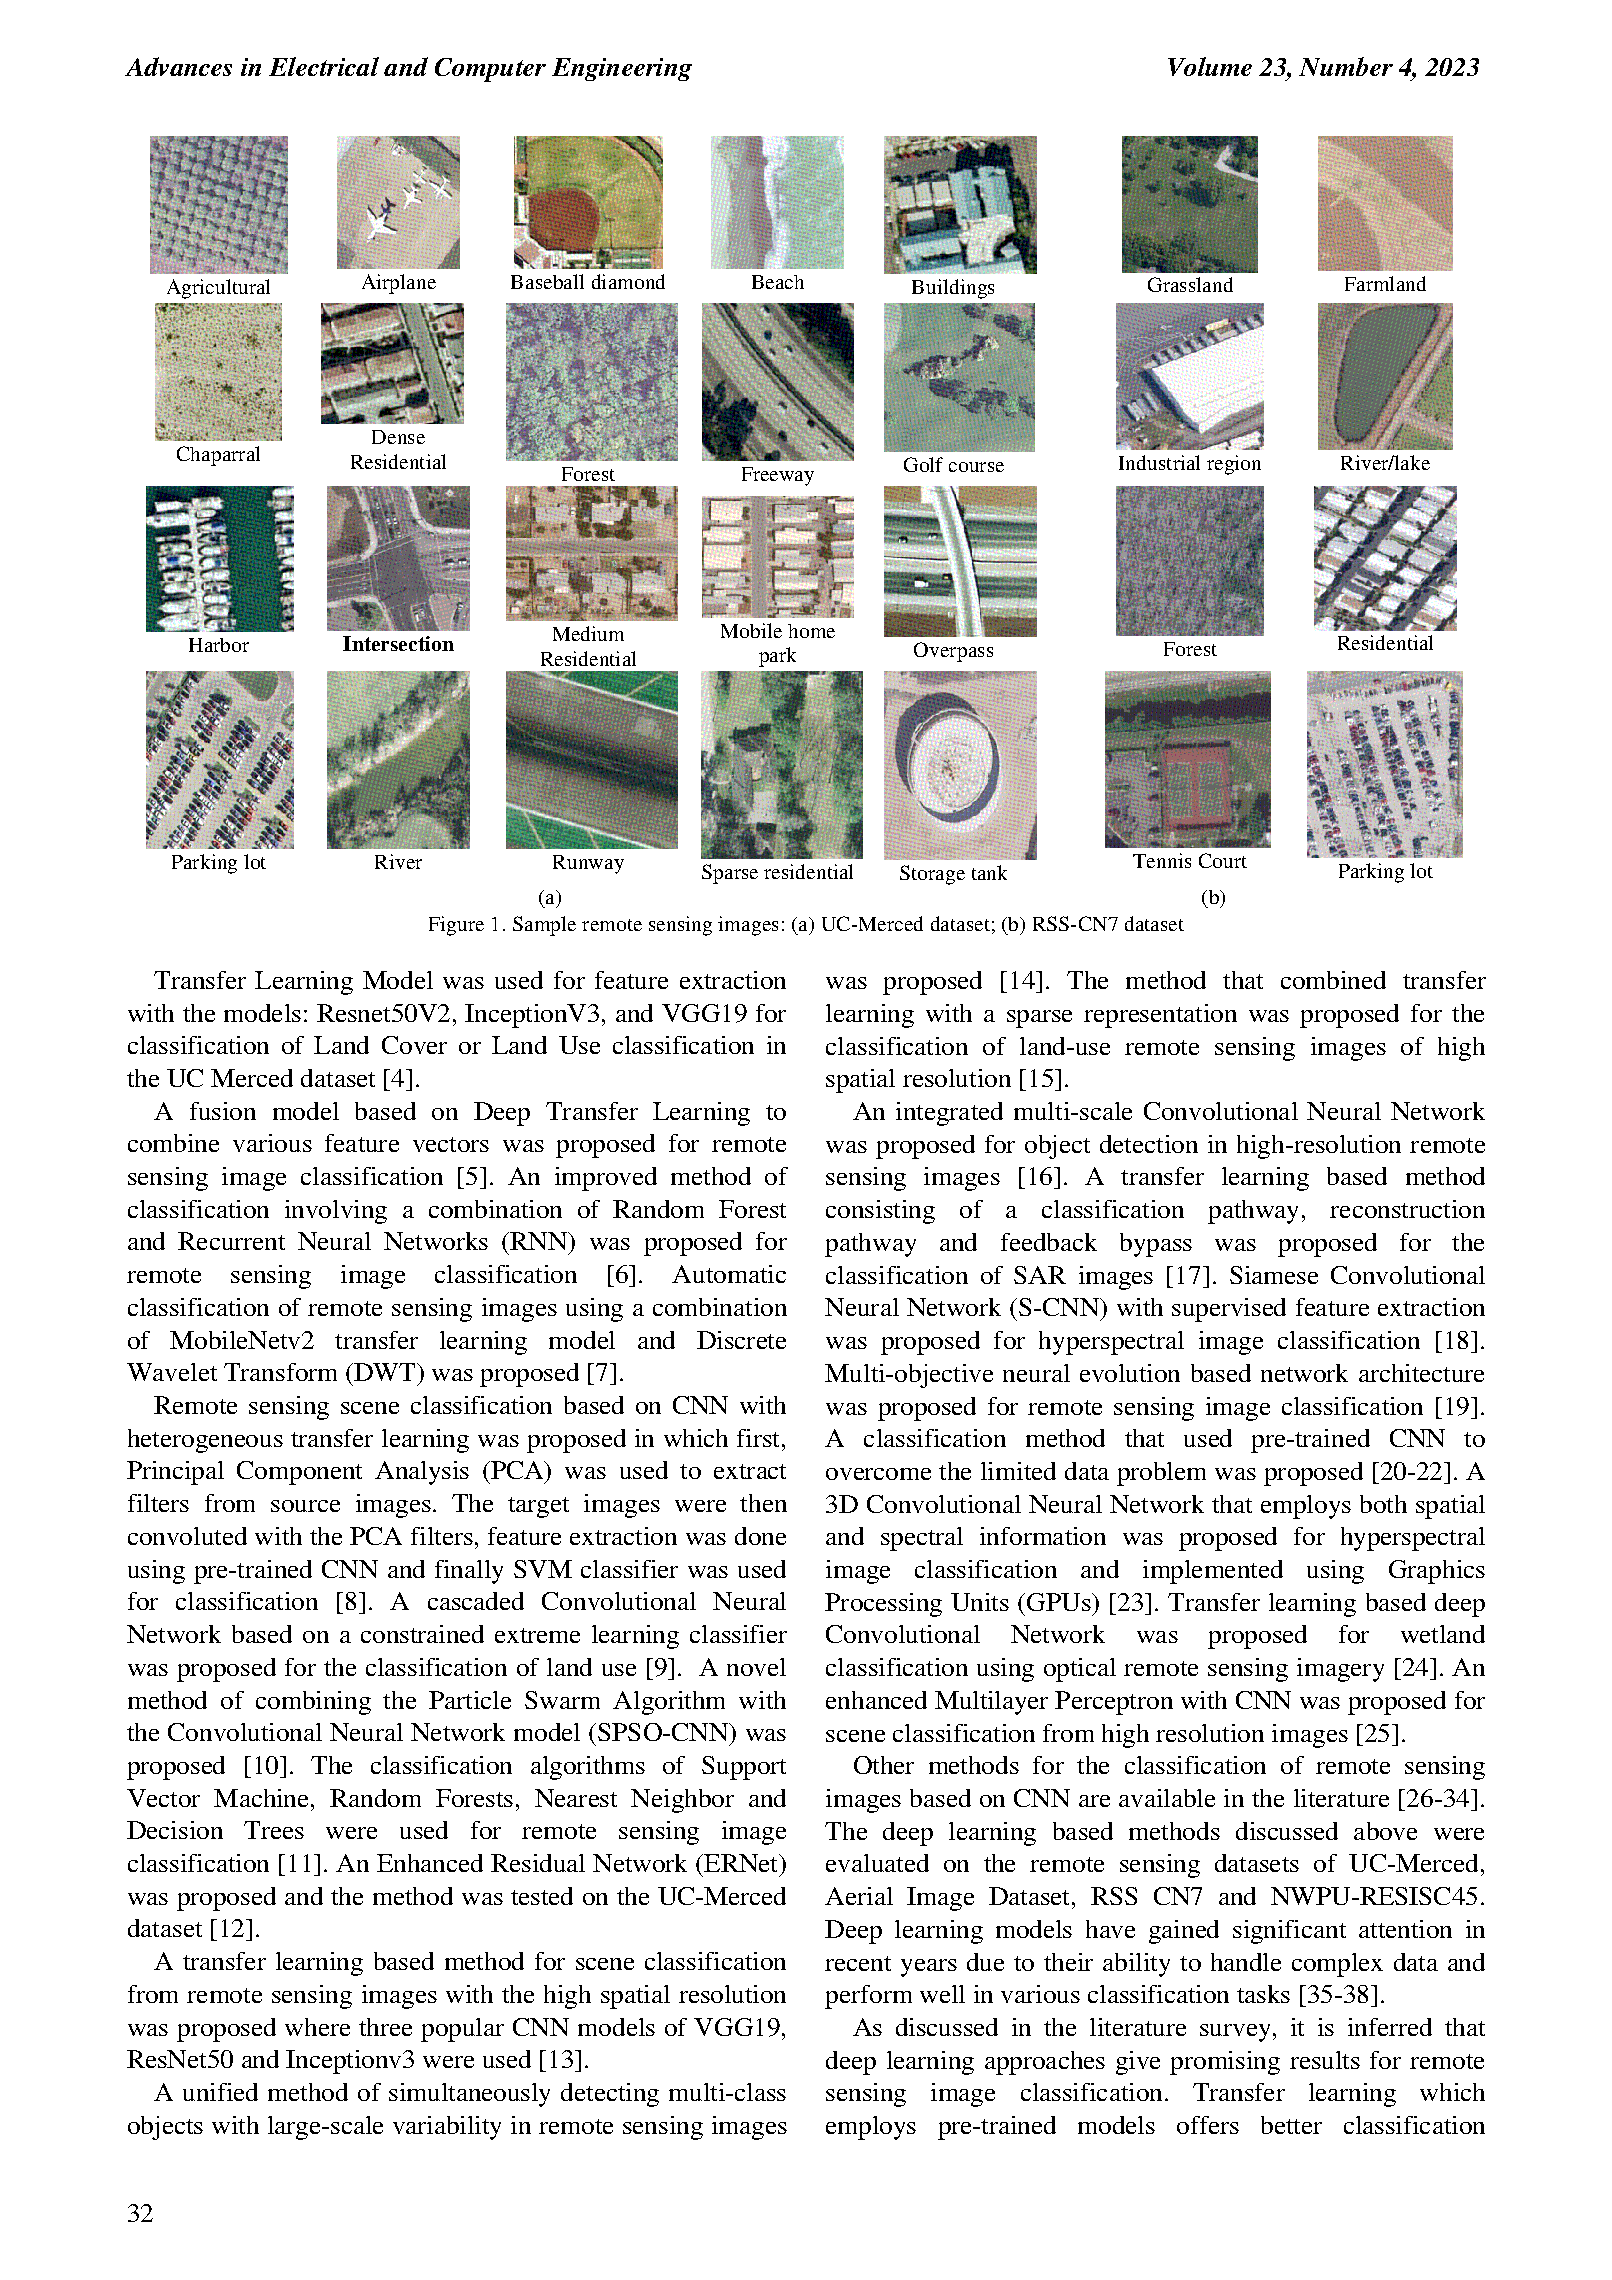 PDF Quickview for paper with DOI:10.4316/AECE.2023.04004